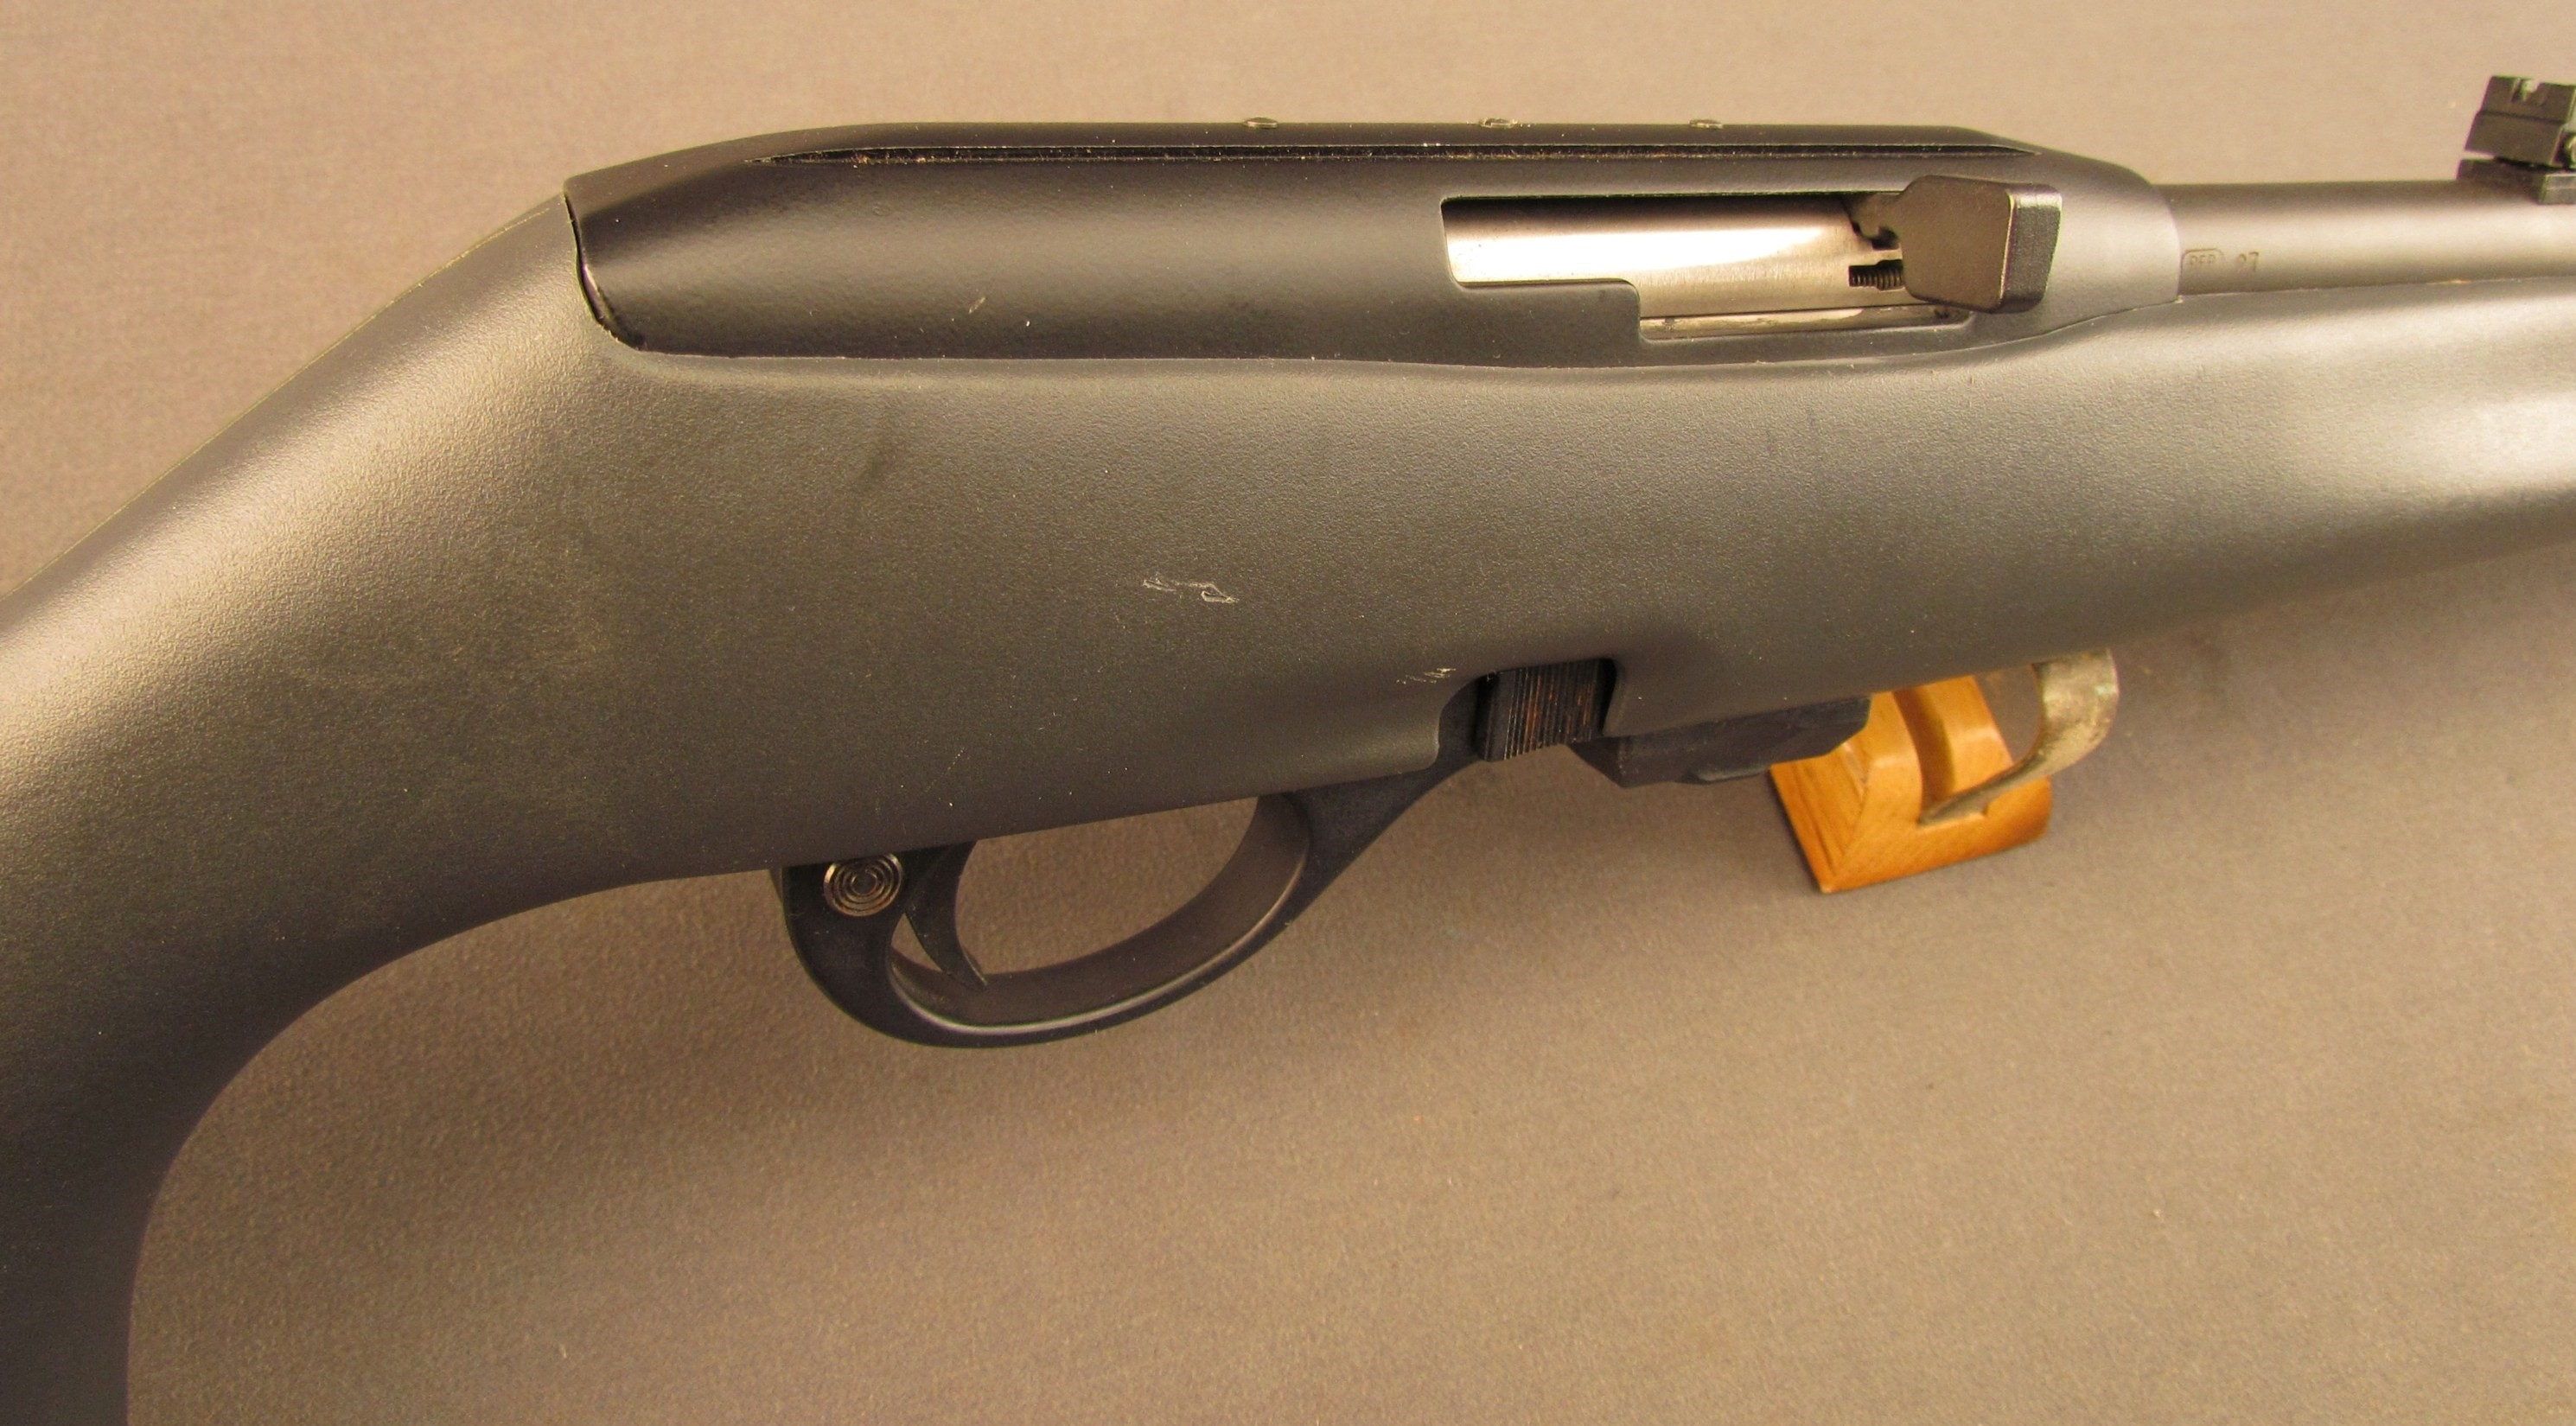 The receiver of Remington 597, chambered for .22 LR 